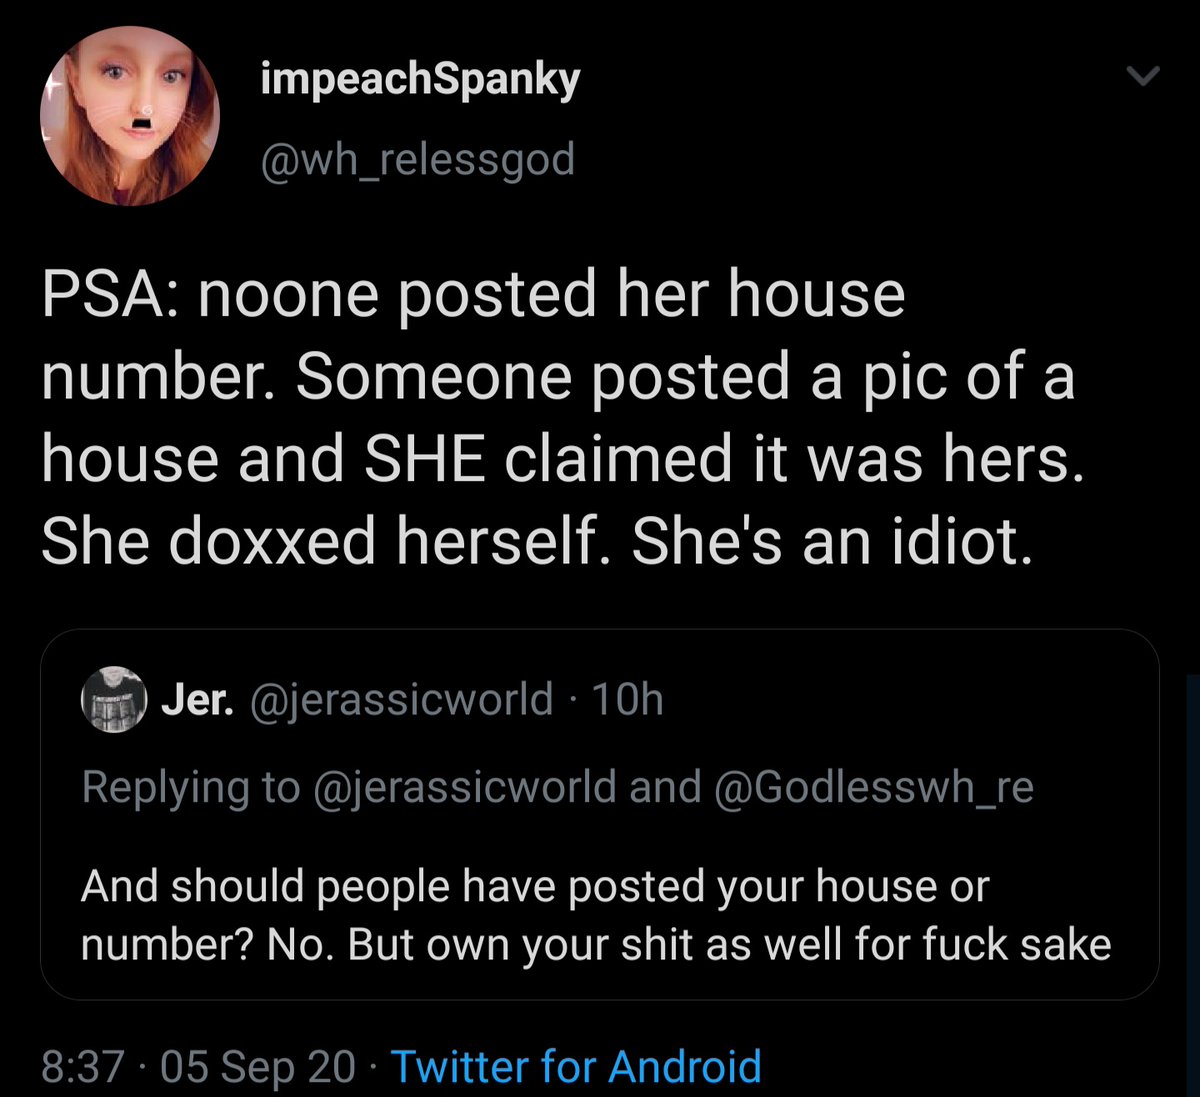 Apparently Reless won't stop even at that, they admit they have posted pics of her house previously and claim since she asked them to remove them she doxxed herself(that's not how that works):  https://twitter.com/wh_relessgod/status/1302224421302800384?s=19 https://archive.is/k30S1 